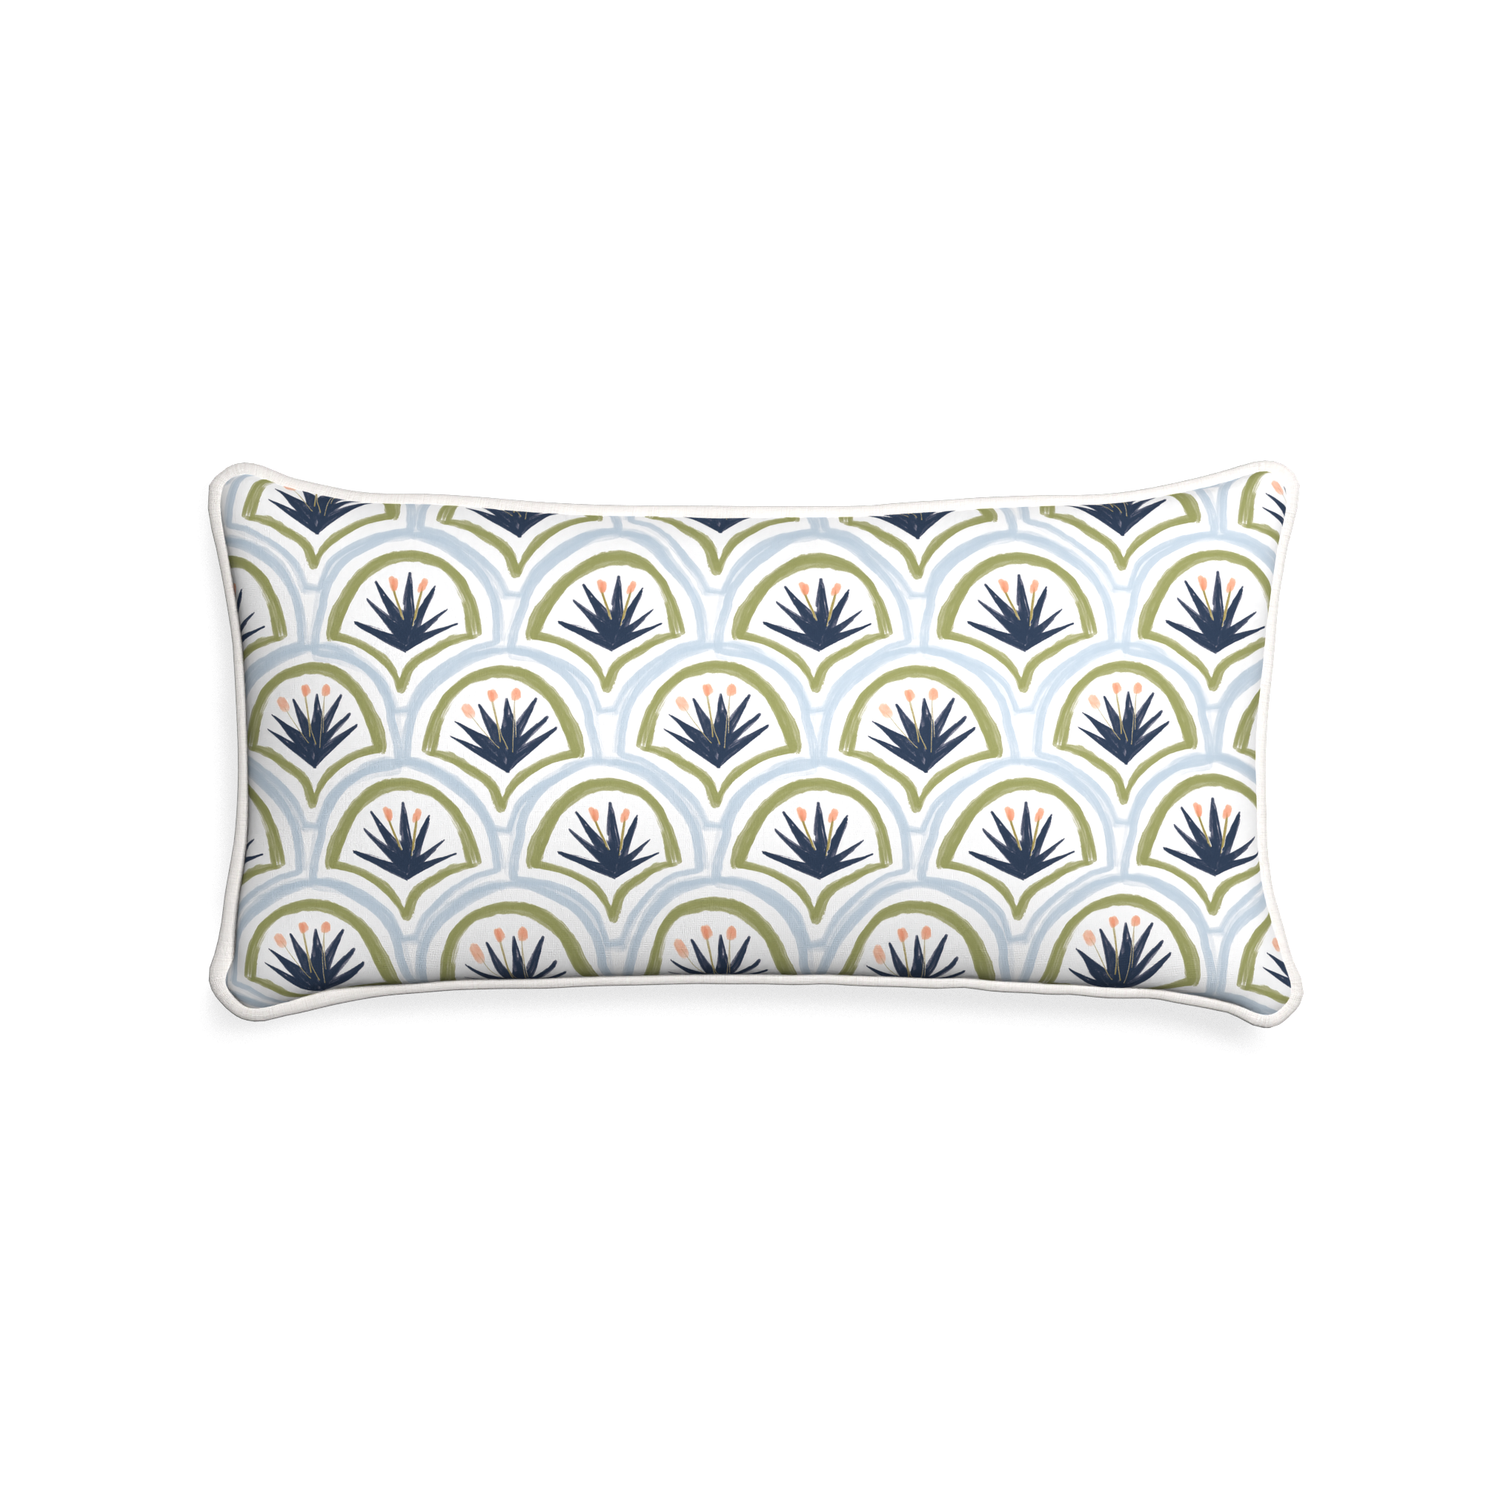 Midi-lumbar thatcher midnight custom art deco palm patternpillow with snow piping on white background